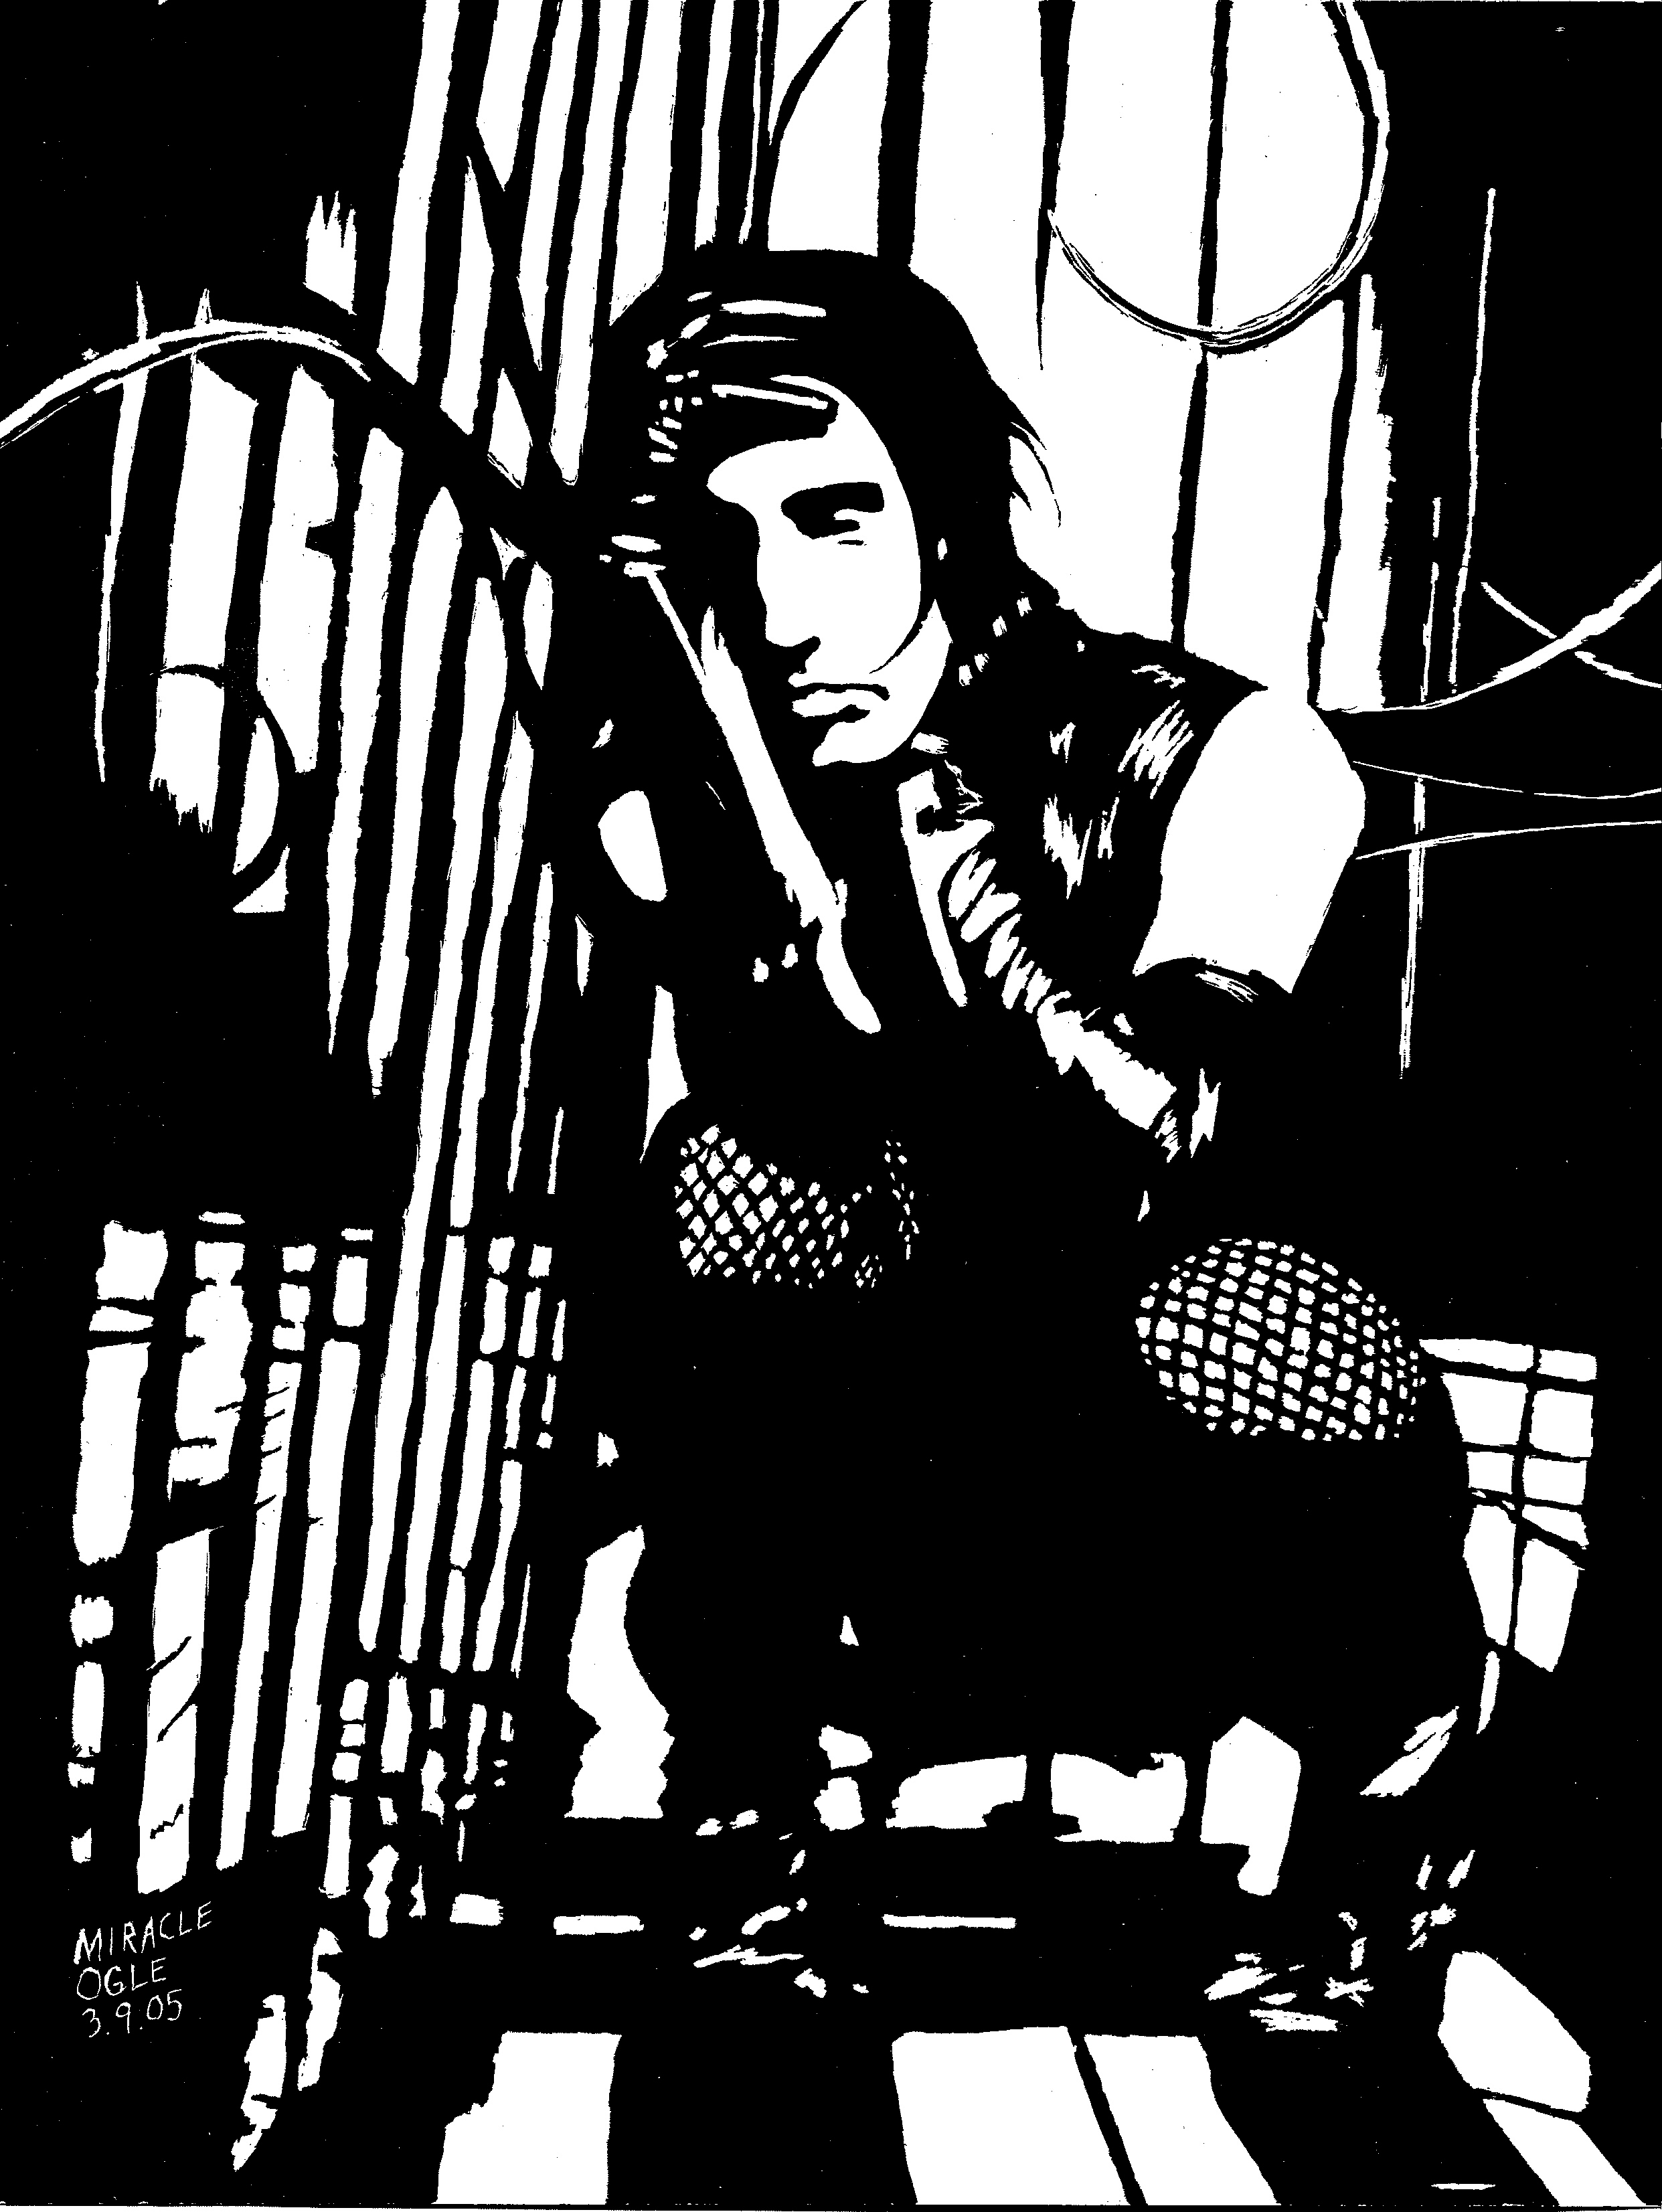 Trent Reznor Wish Scratchboard By Miracleogle